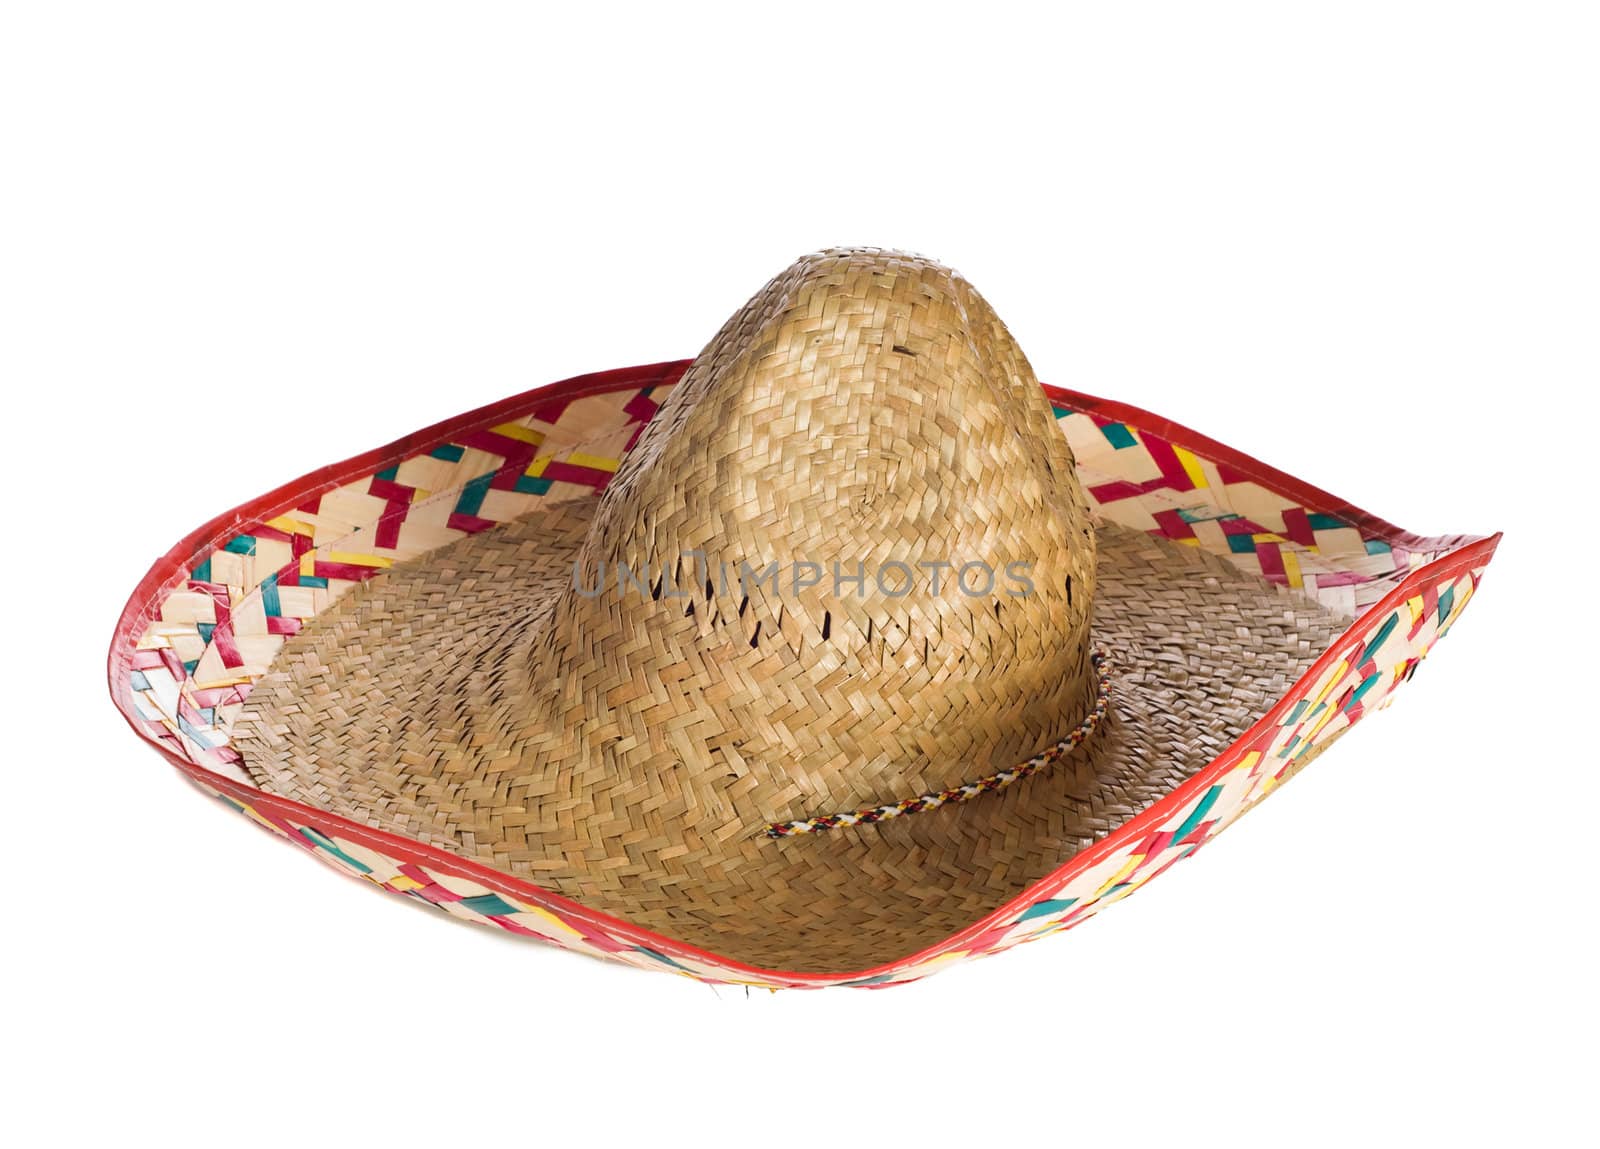 A common sombrero hat isolated against a white background